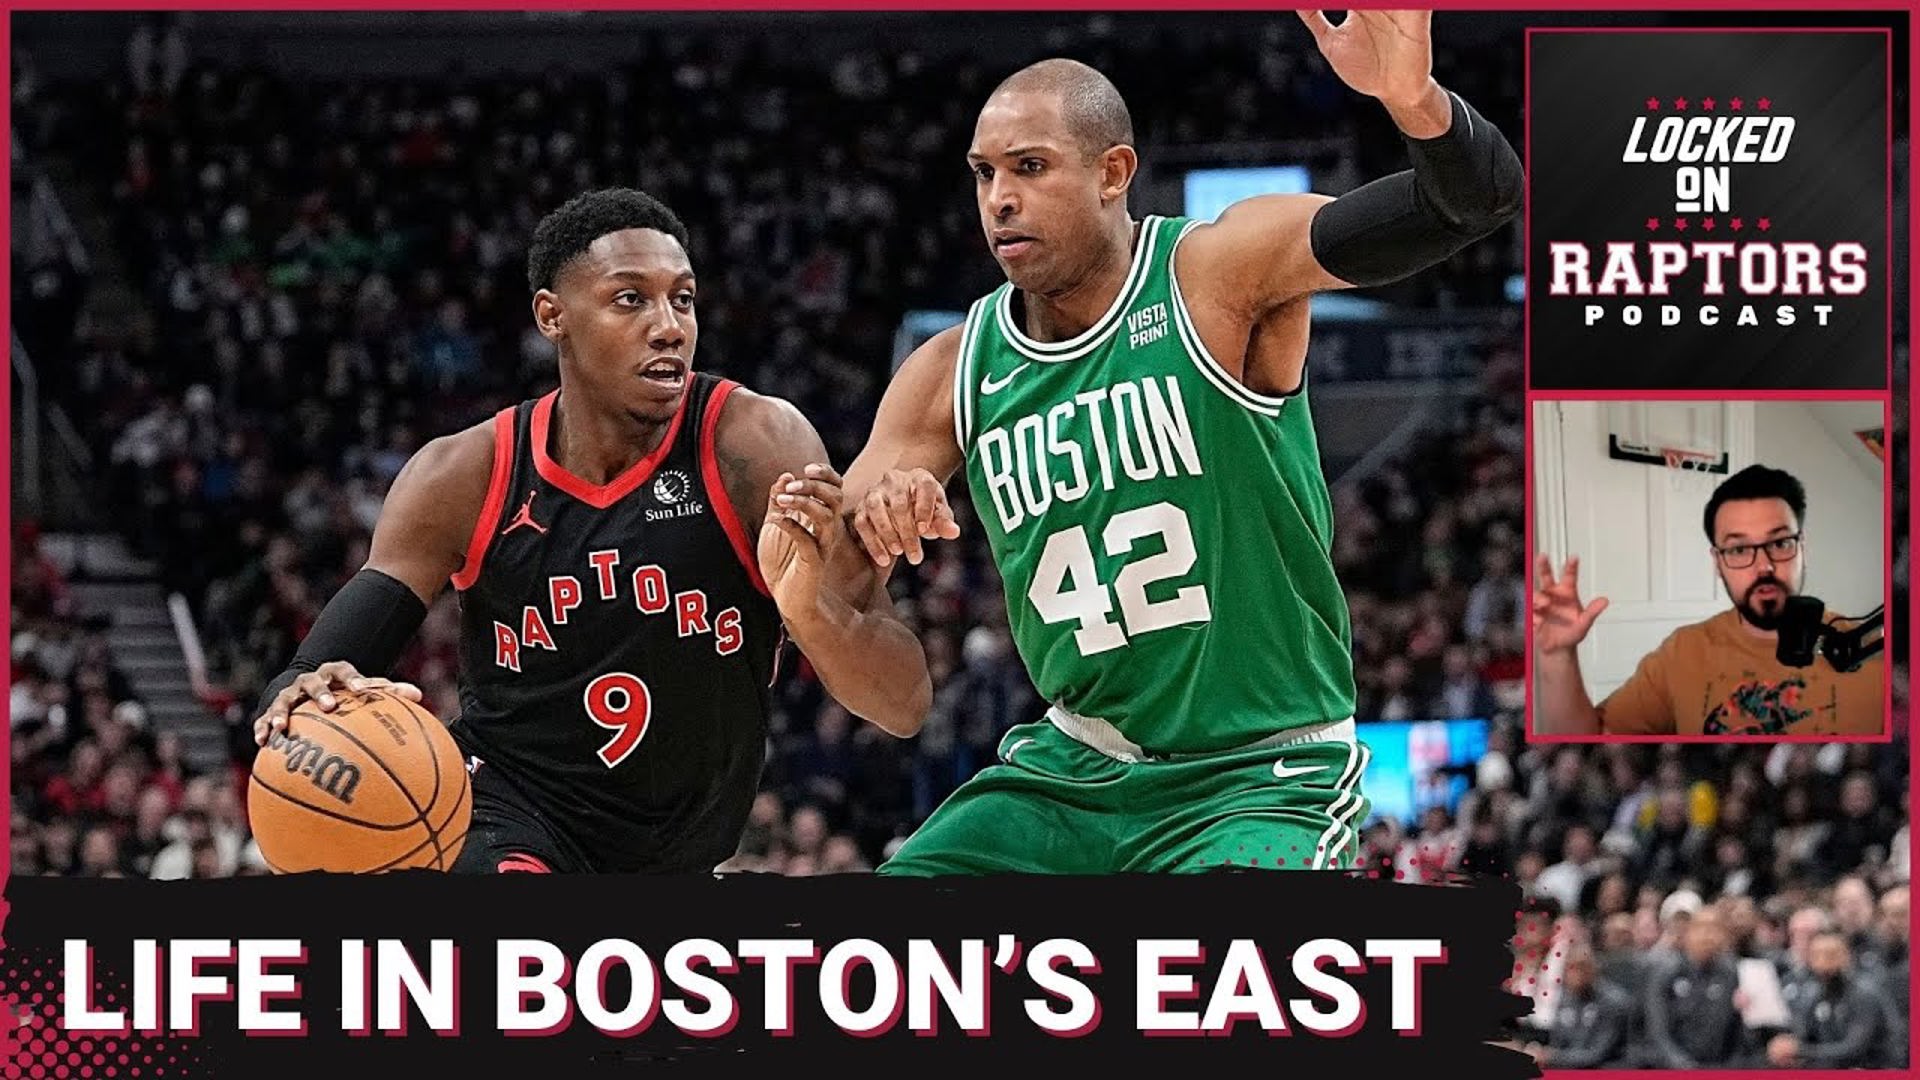 Sean Woodley goes solo to field listener questions about how the Toronto Raptors should operate in an Eastern Conference owned by the Boston Celtics